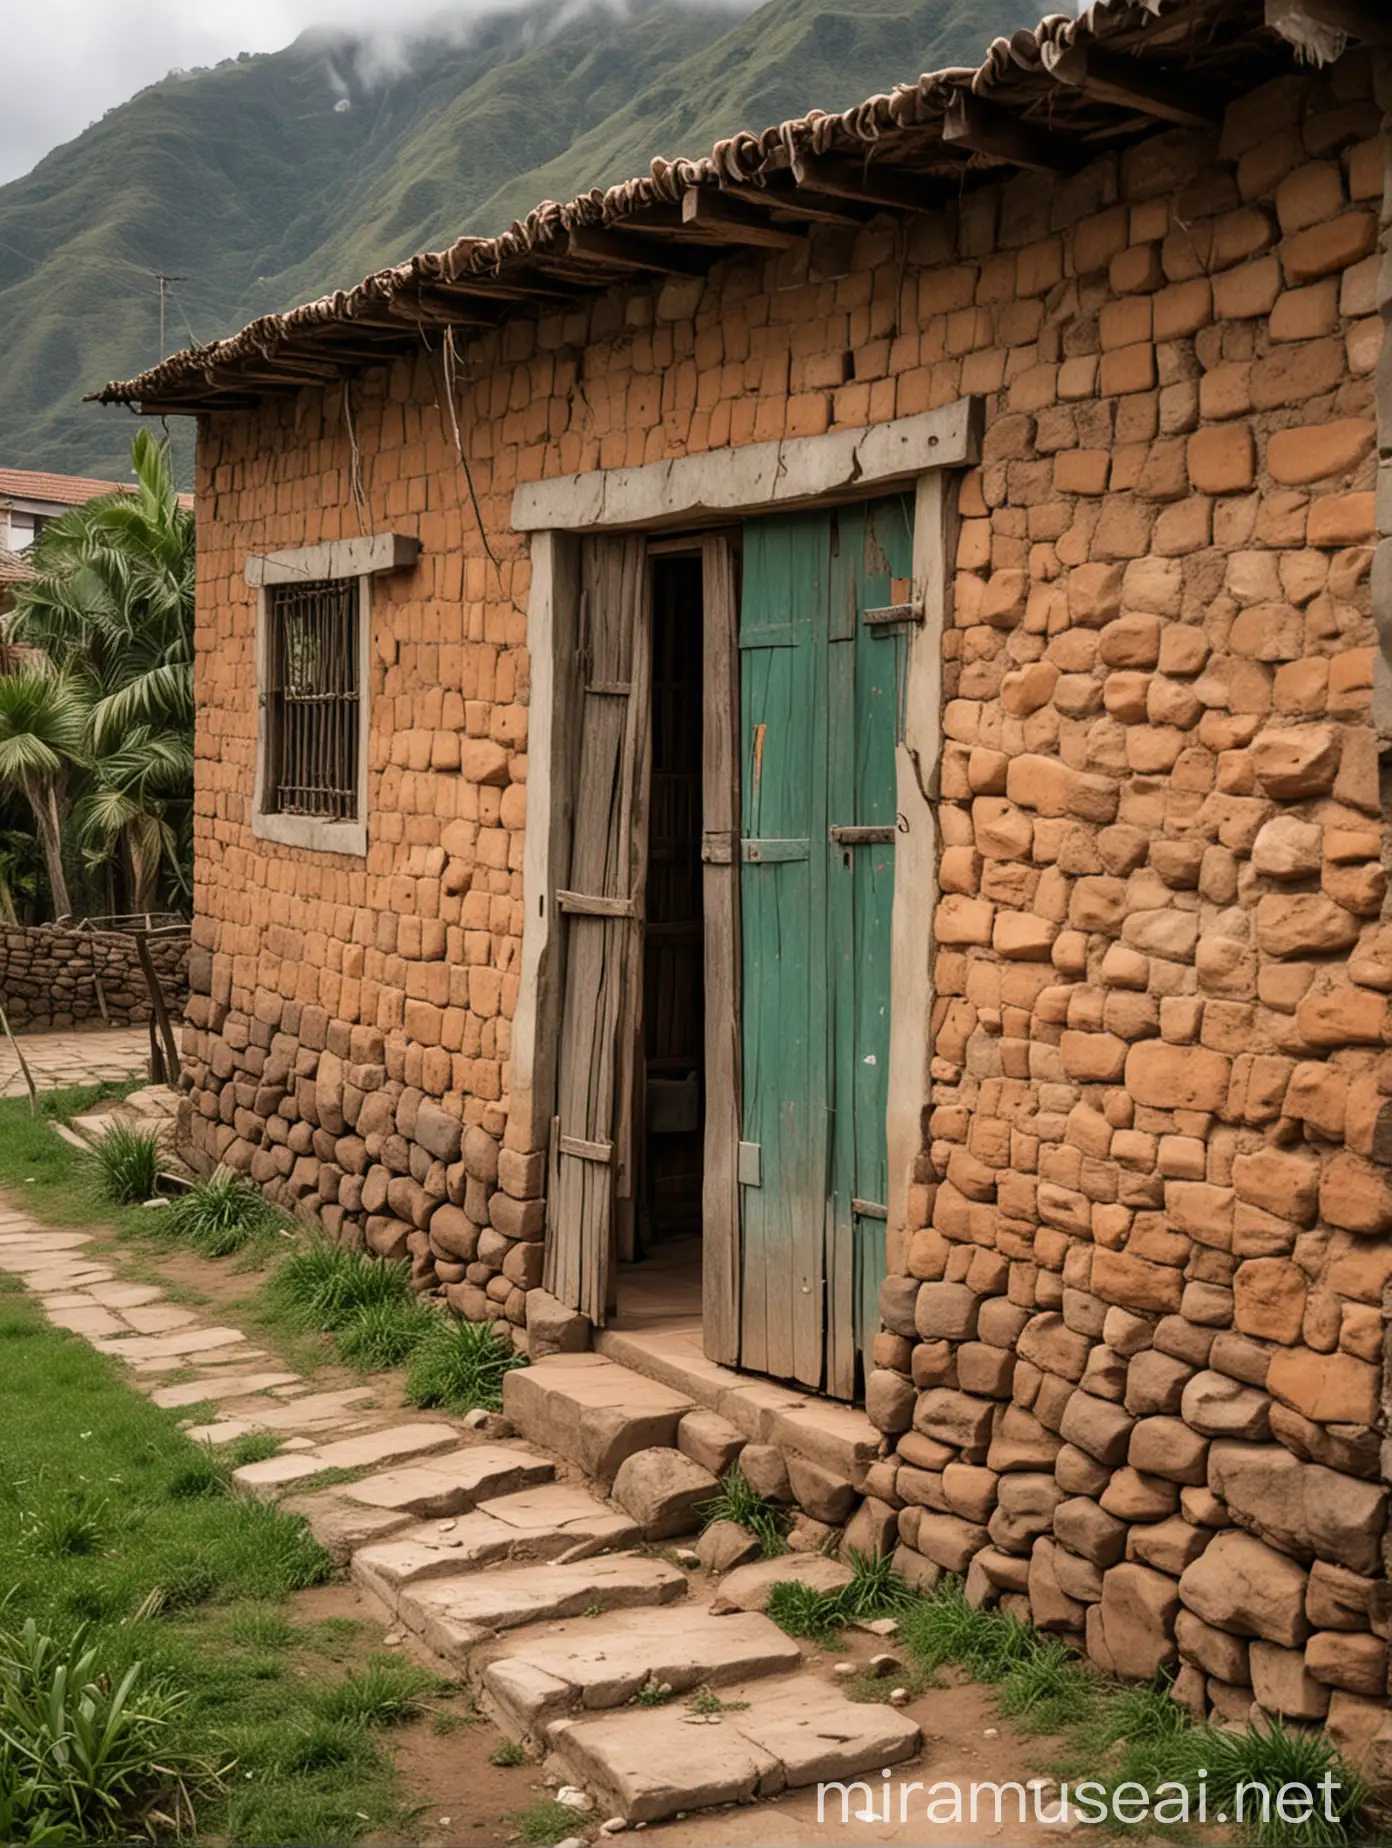 Rustic Peruvian Rural House by the Trackside